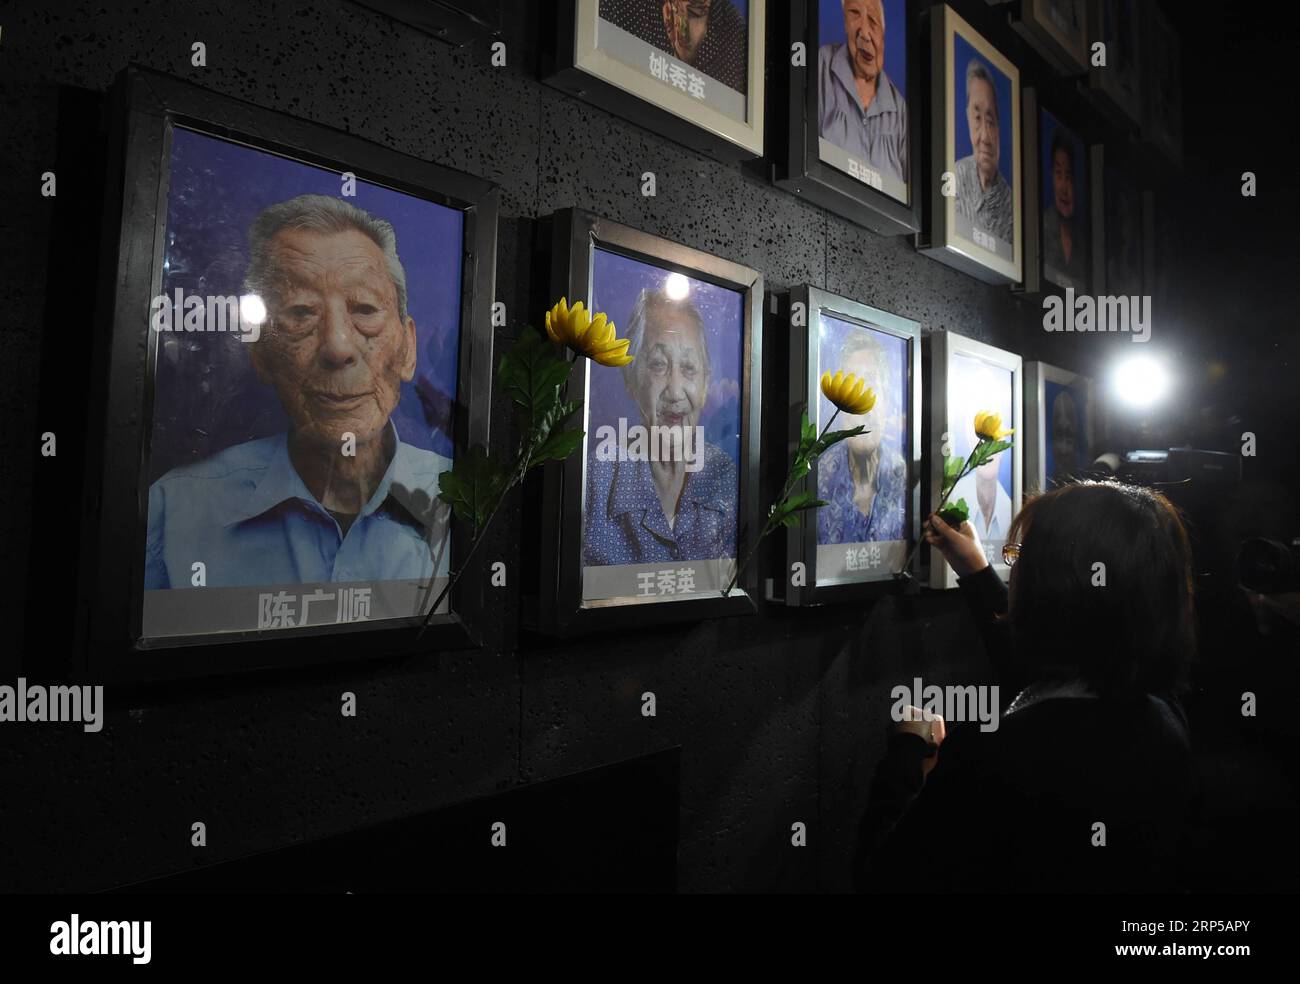 China, Menschen gedenken der Opfer des Massakers von Nanking (181206) -- NANJING, Dec. 6, 2018 (Xinhua) -- A staff member places flowers next to the portraits of late Nanjing Massacre survivors Chen Guangshun, Wang Xiuying and Zhao Jinhua at the Memorial Hall of the Victims in Nanjing Massacre by Japanese Invaders in Nanjing, capital of east China s Jiangsu Province, Dec. 6, 2018. A total of 20 survivors have passed away this year, according to the Memorial Hall. The Nanjing Massacre took place when Japanese troops captured the city on Dec. 13, 1937. Over six weeks, they killed 300,000 Chinese Stock Photo